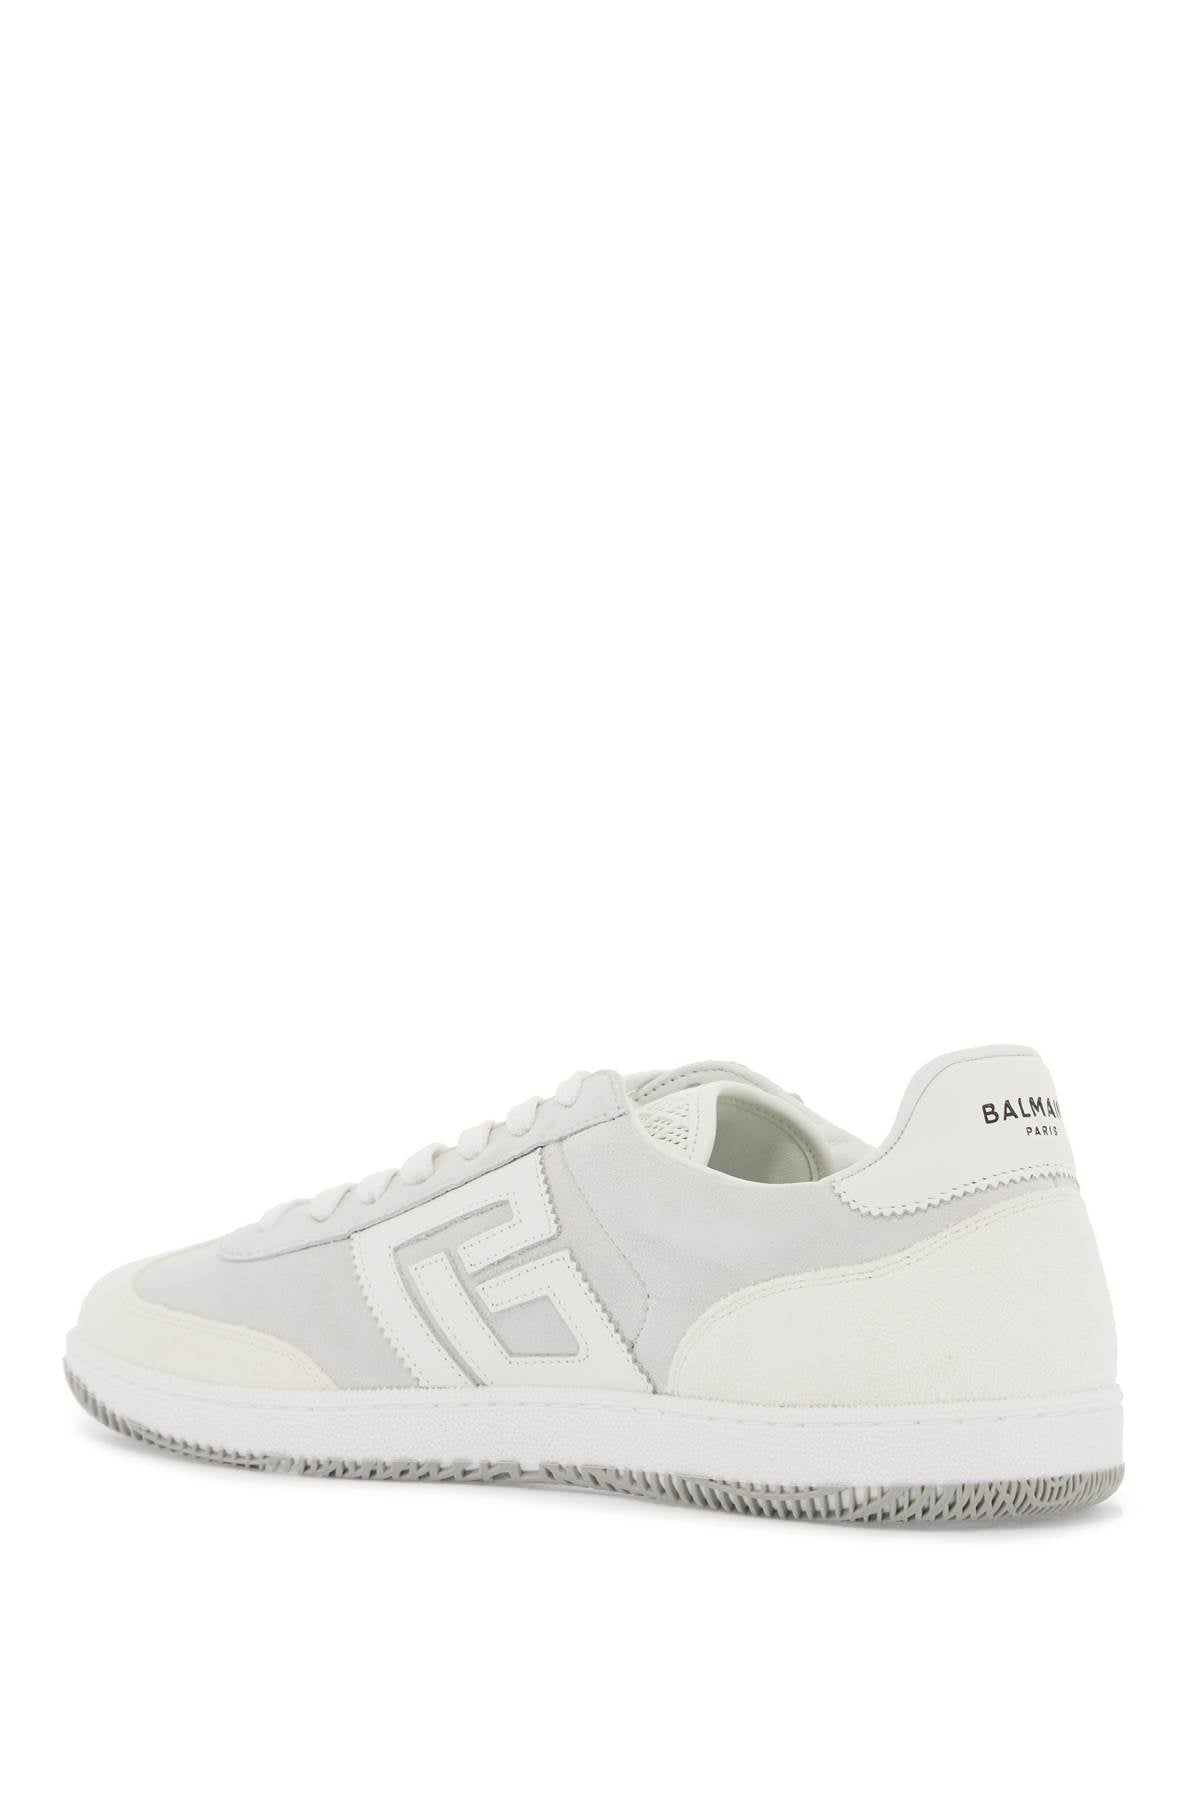 Balmain Leather Swan Sneakers For   White